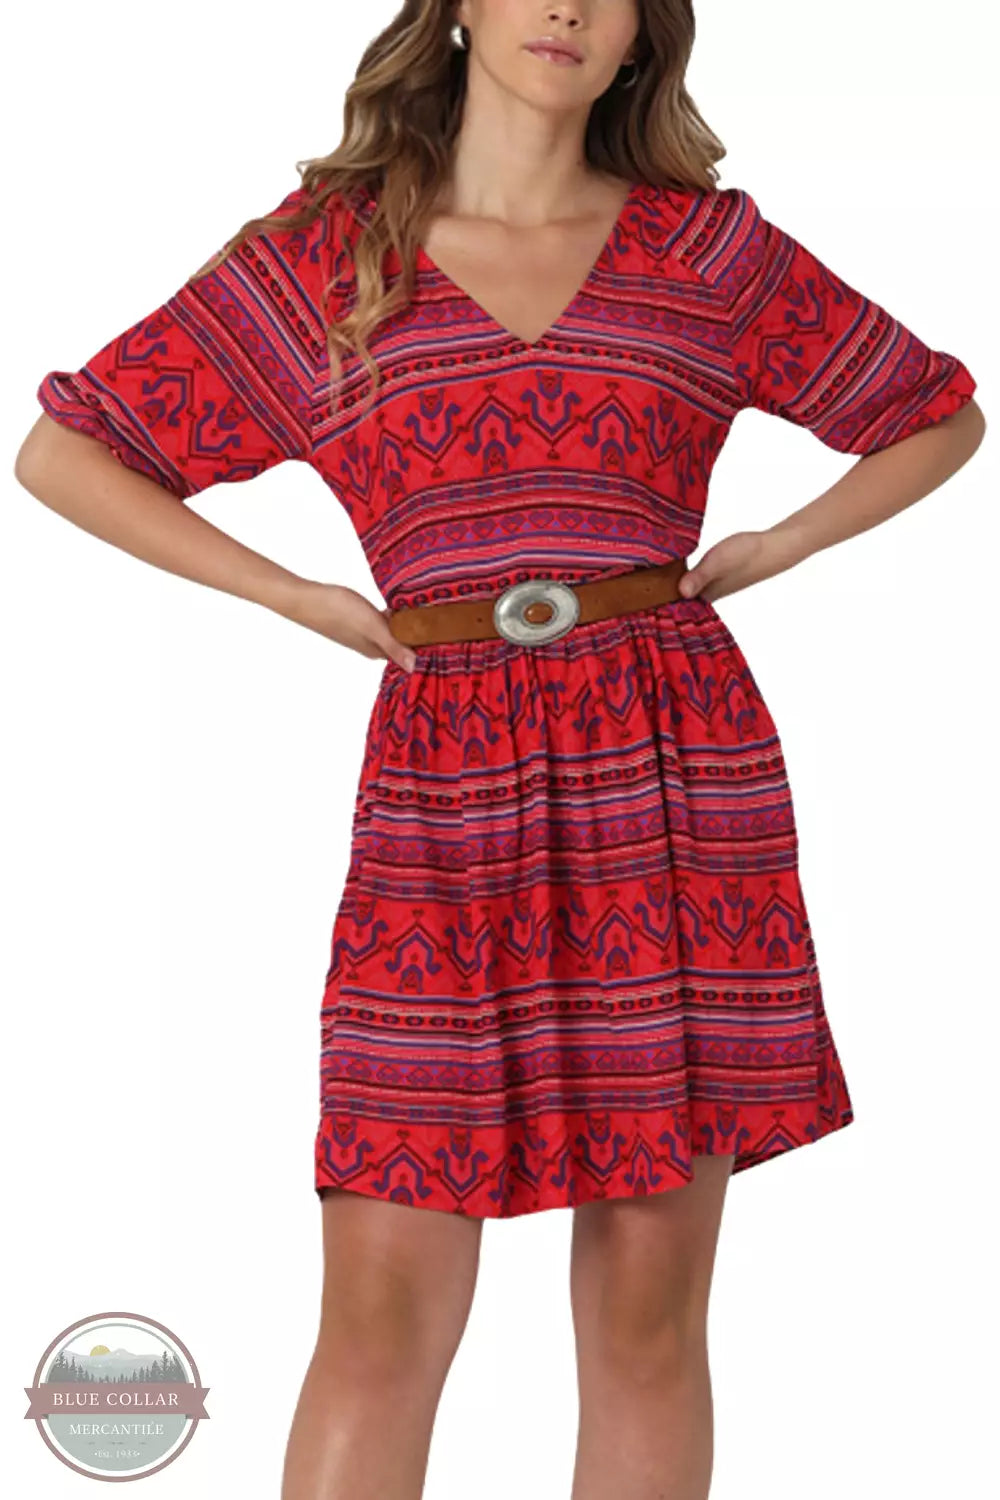 Wrangler 112336453 Retro Americana Half Sleeve Dress in a Red Aztec Print Front View